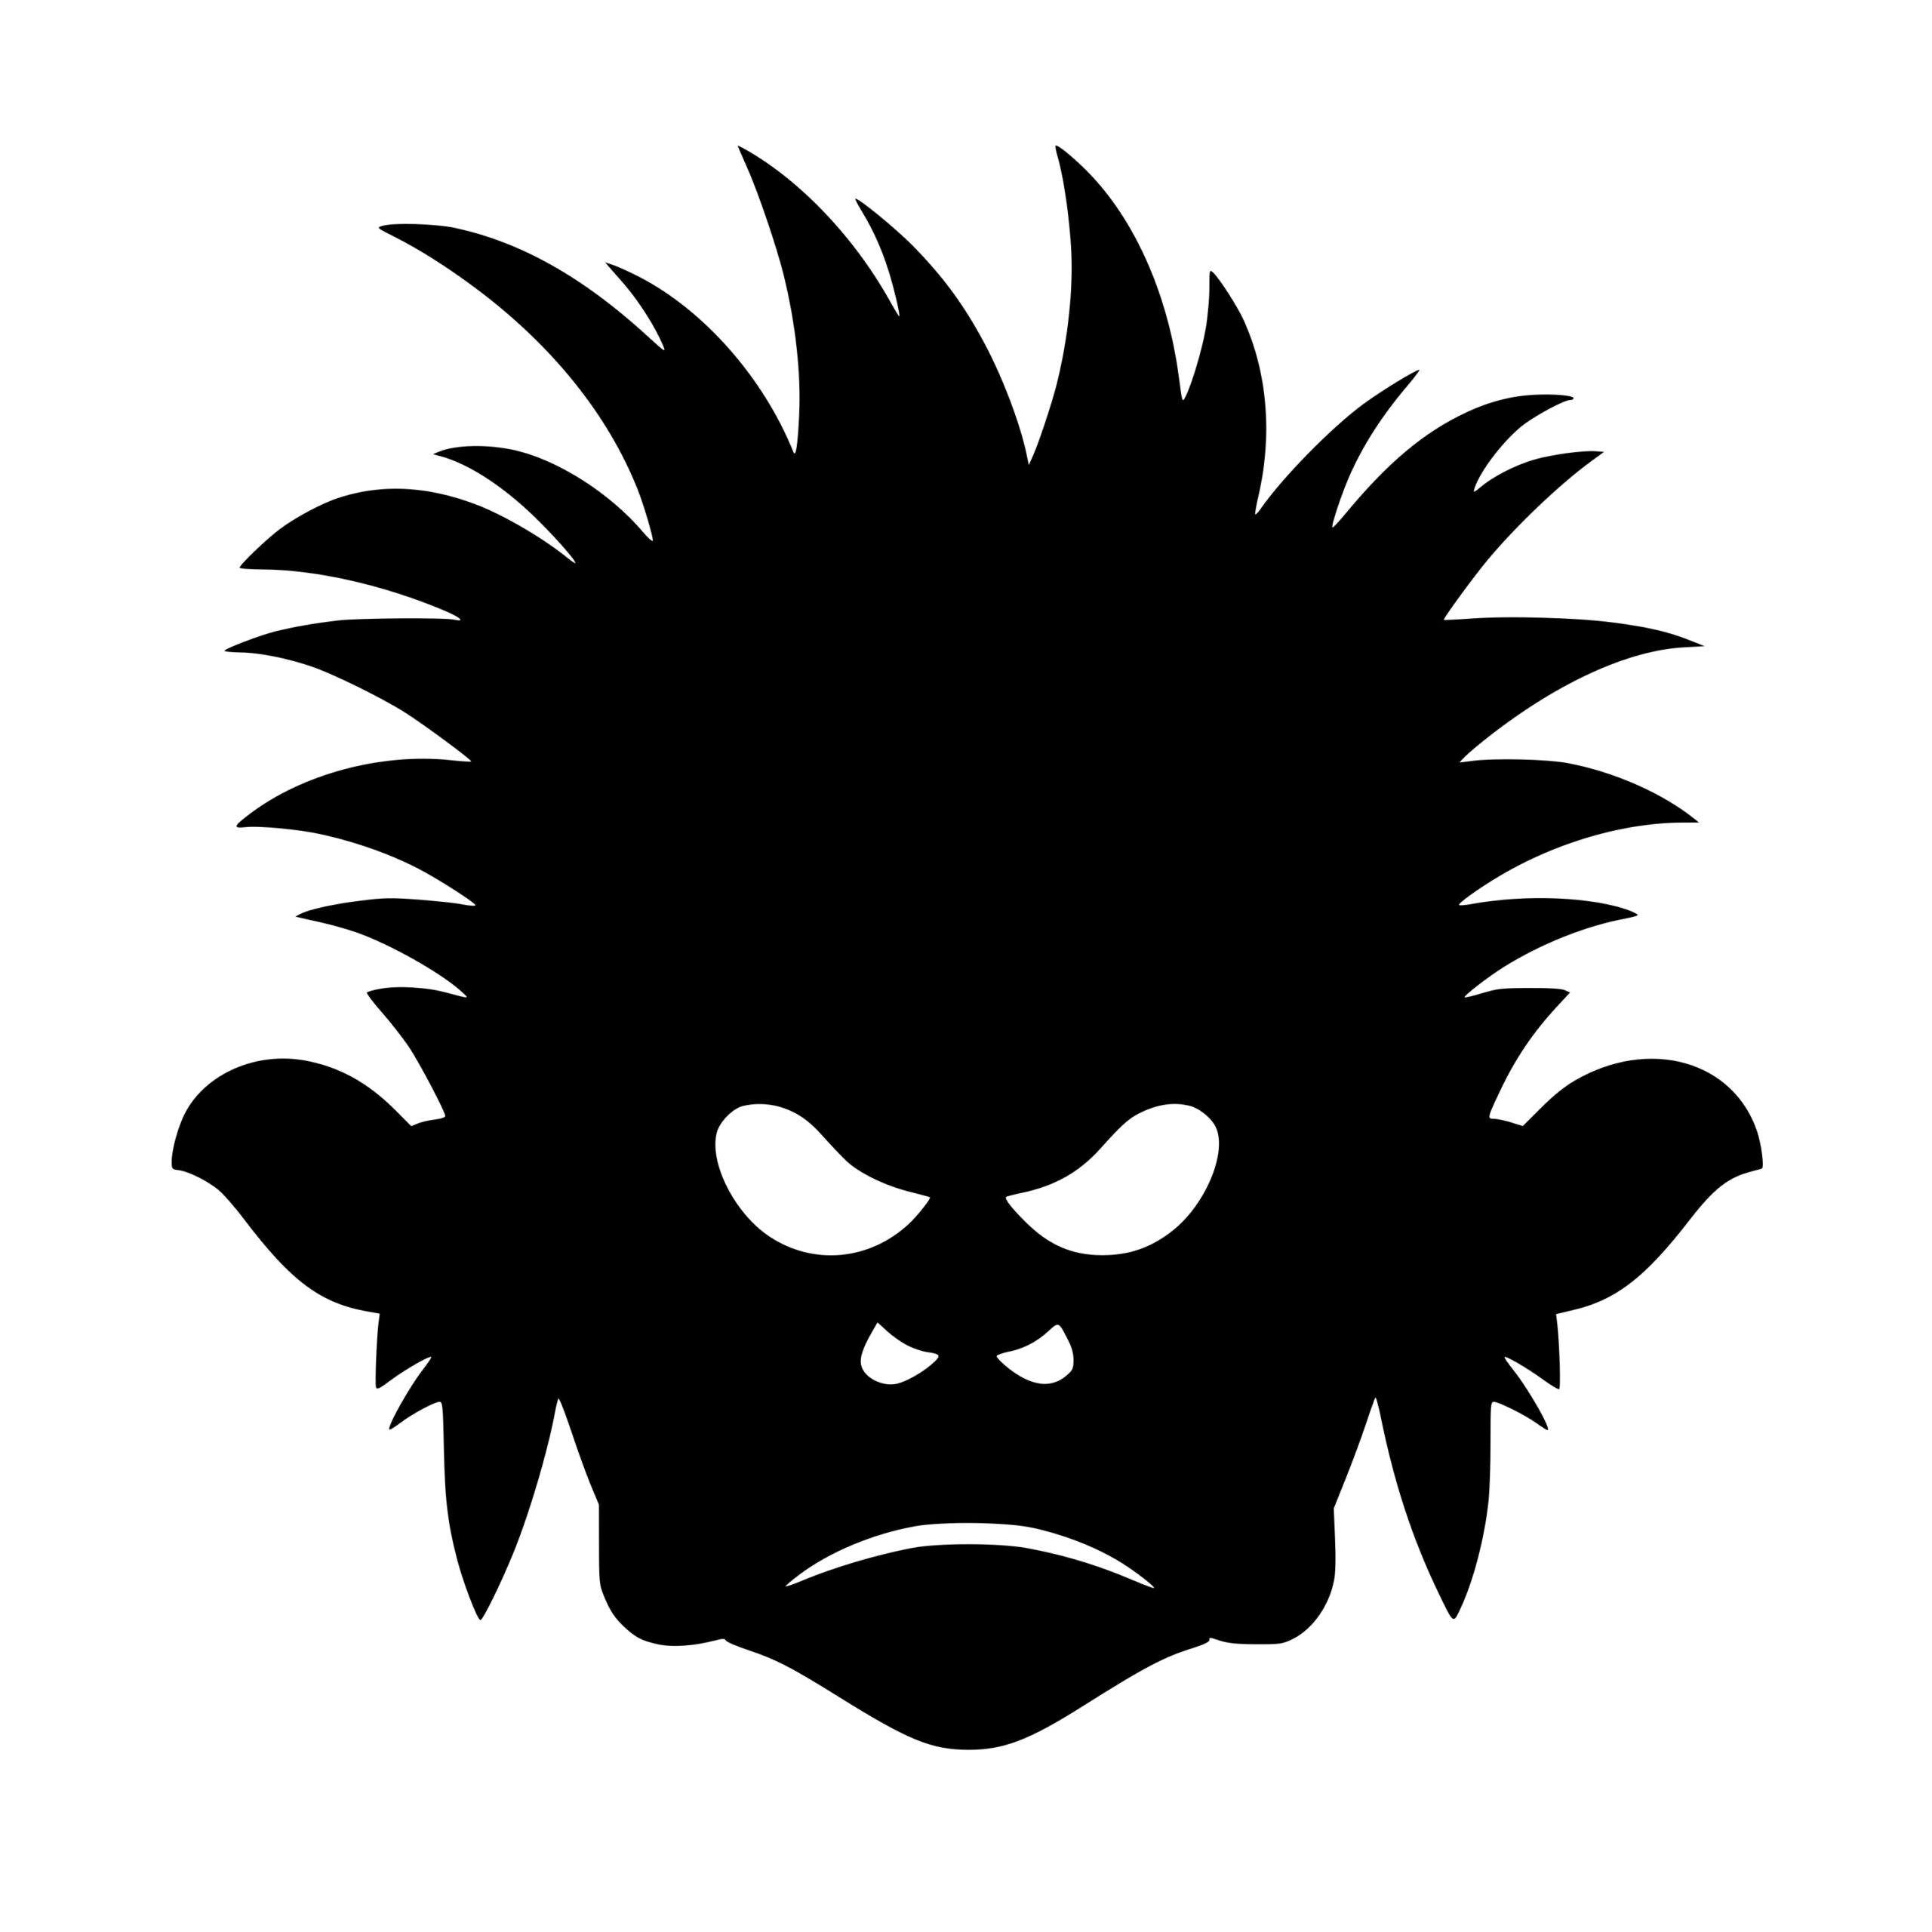 Internet Troll Face Silhouettes Digital Download, SVG, PNG, Cricut,  Silhouette Cut File, Instant Download